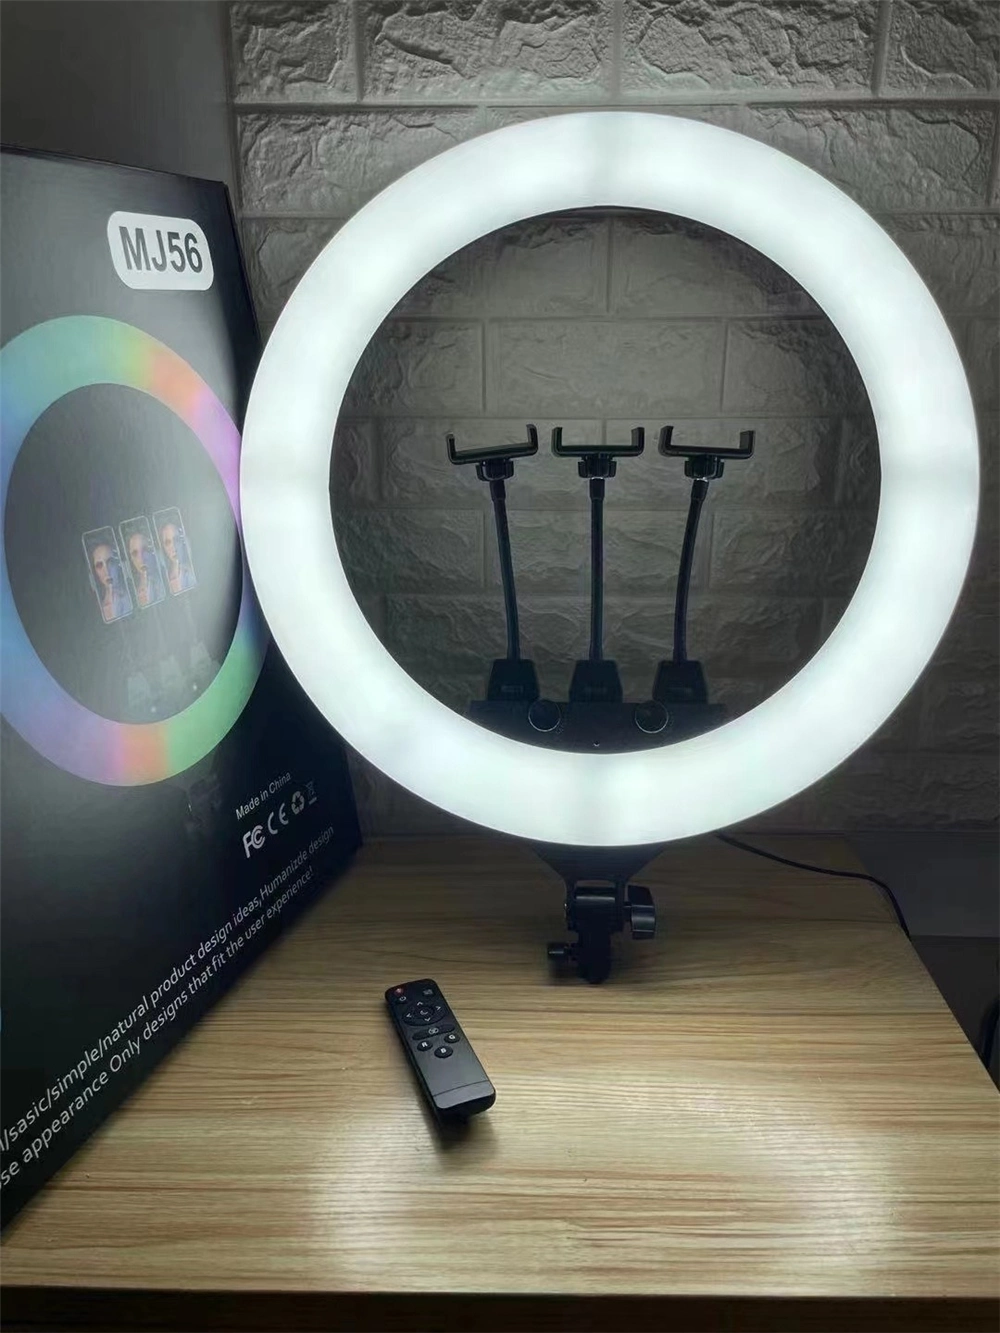 Mj56 22 Inch RGB LED Ring Light with Stand, 60W Dimmable Bi-Color 3200K-5600K CRI 95+ with Special Scenes Effect for Video